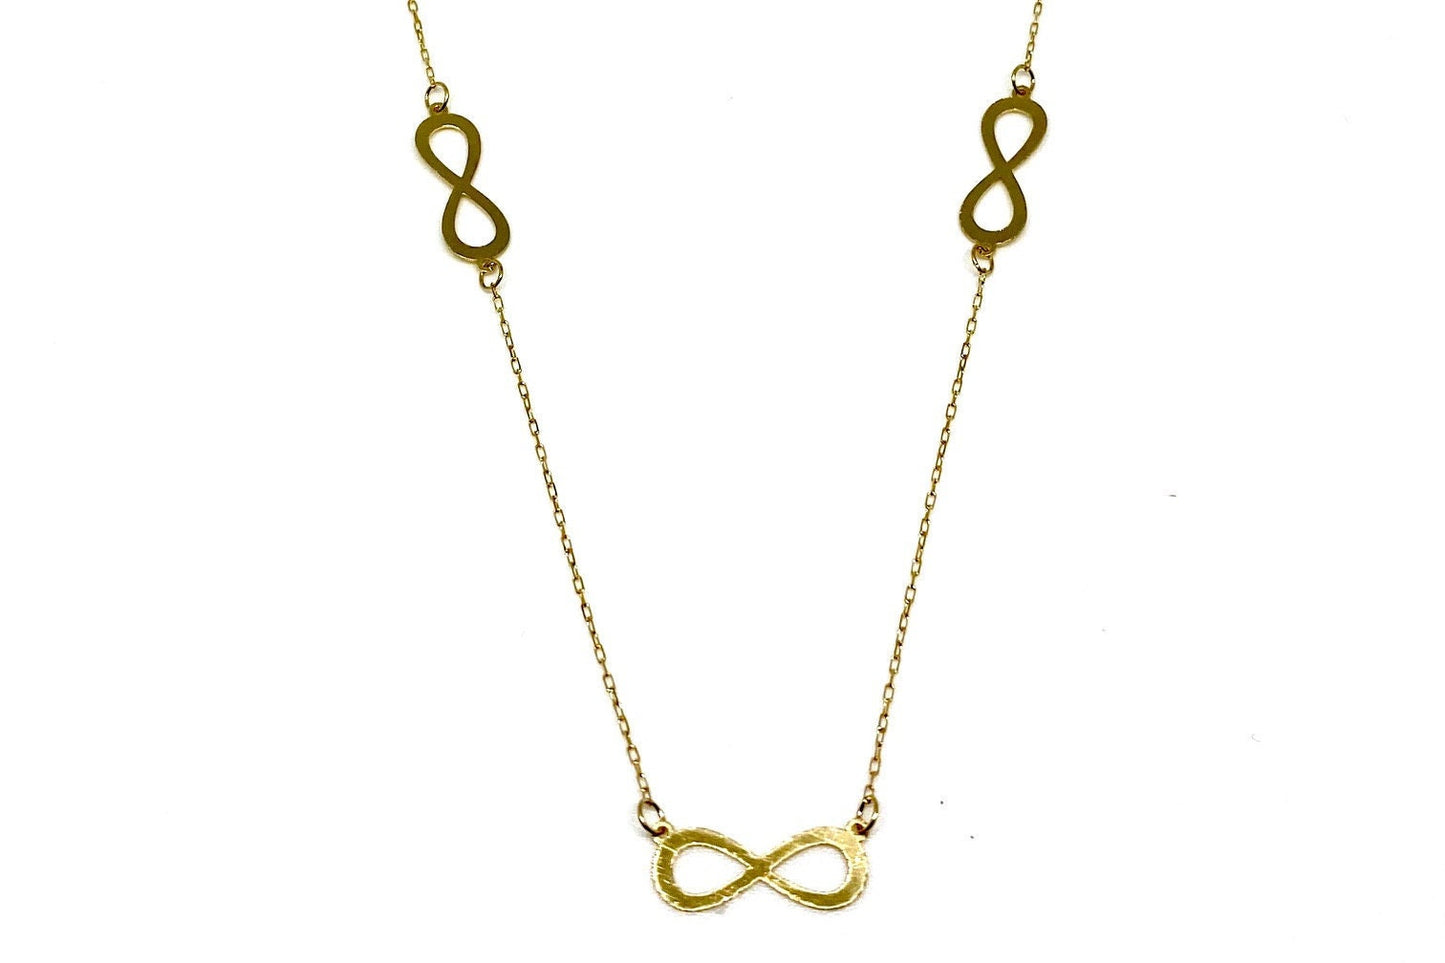 Yellow Gold Infinity Station Pendant Chain Link Necklace